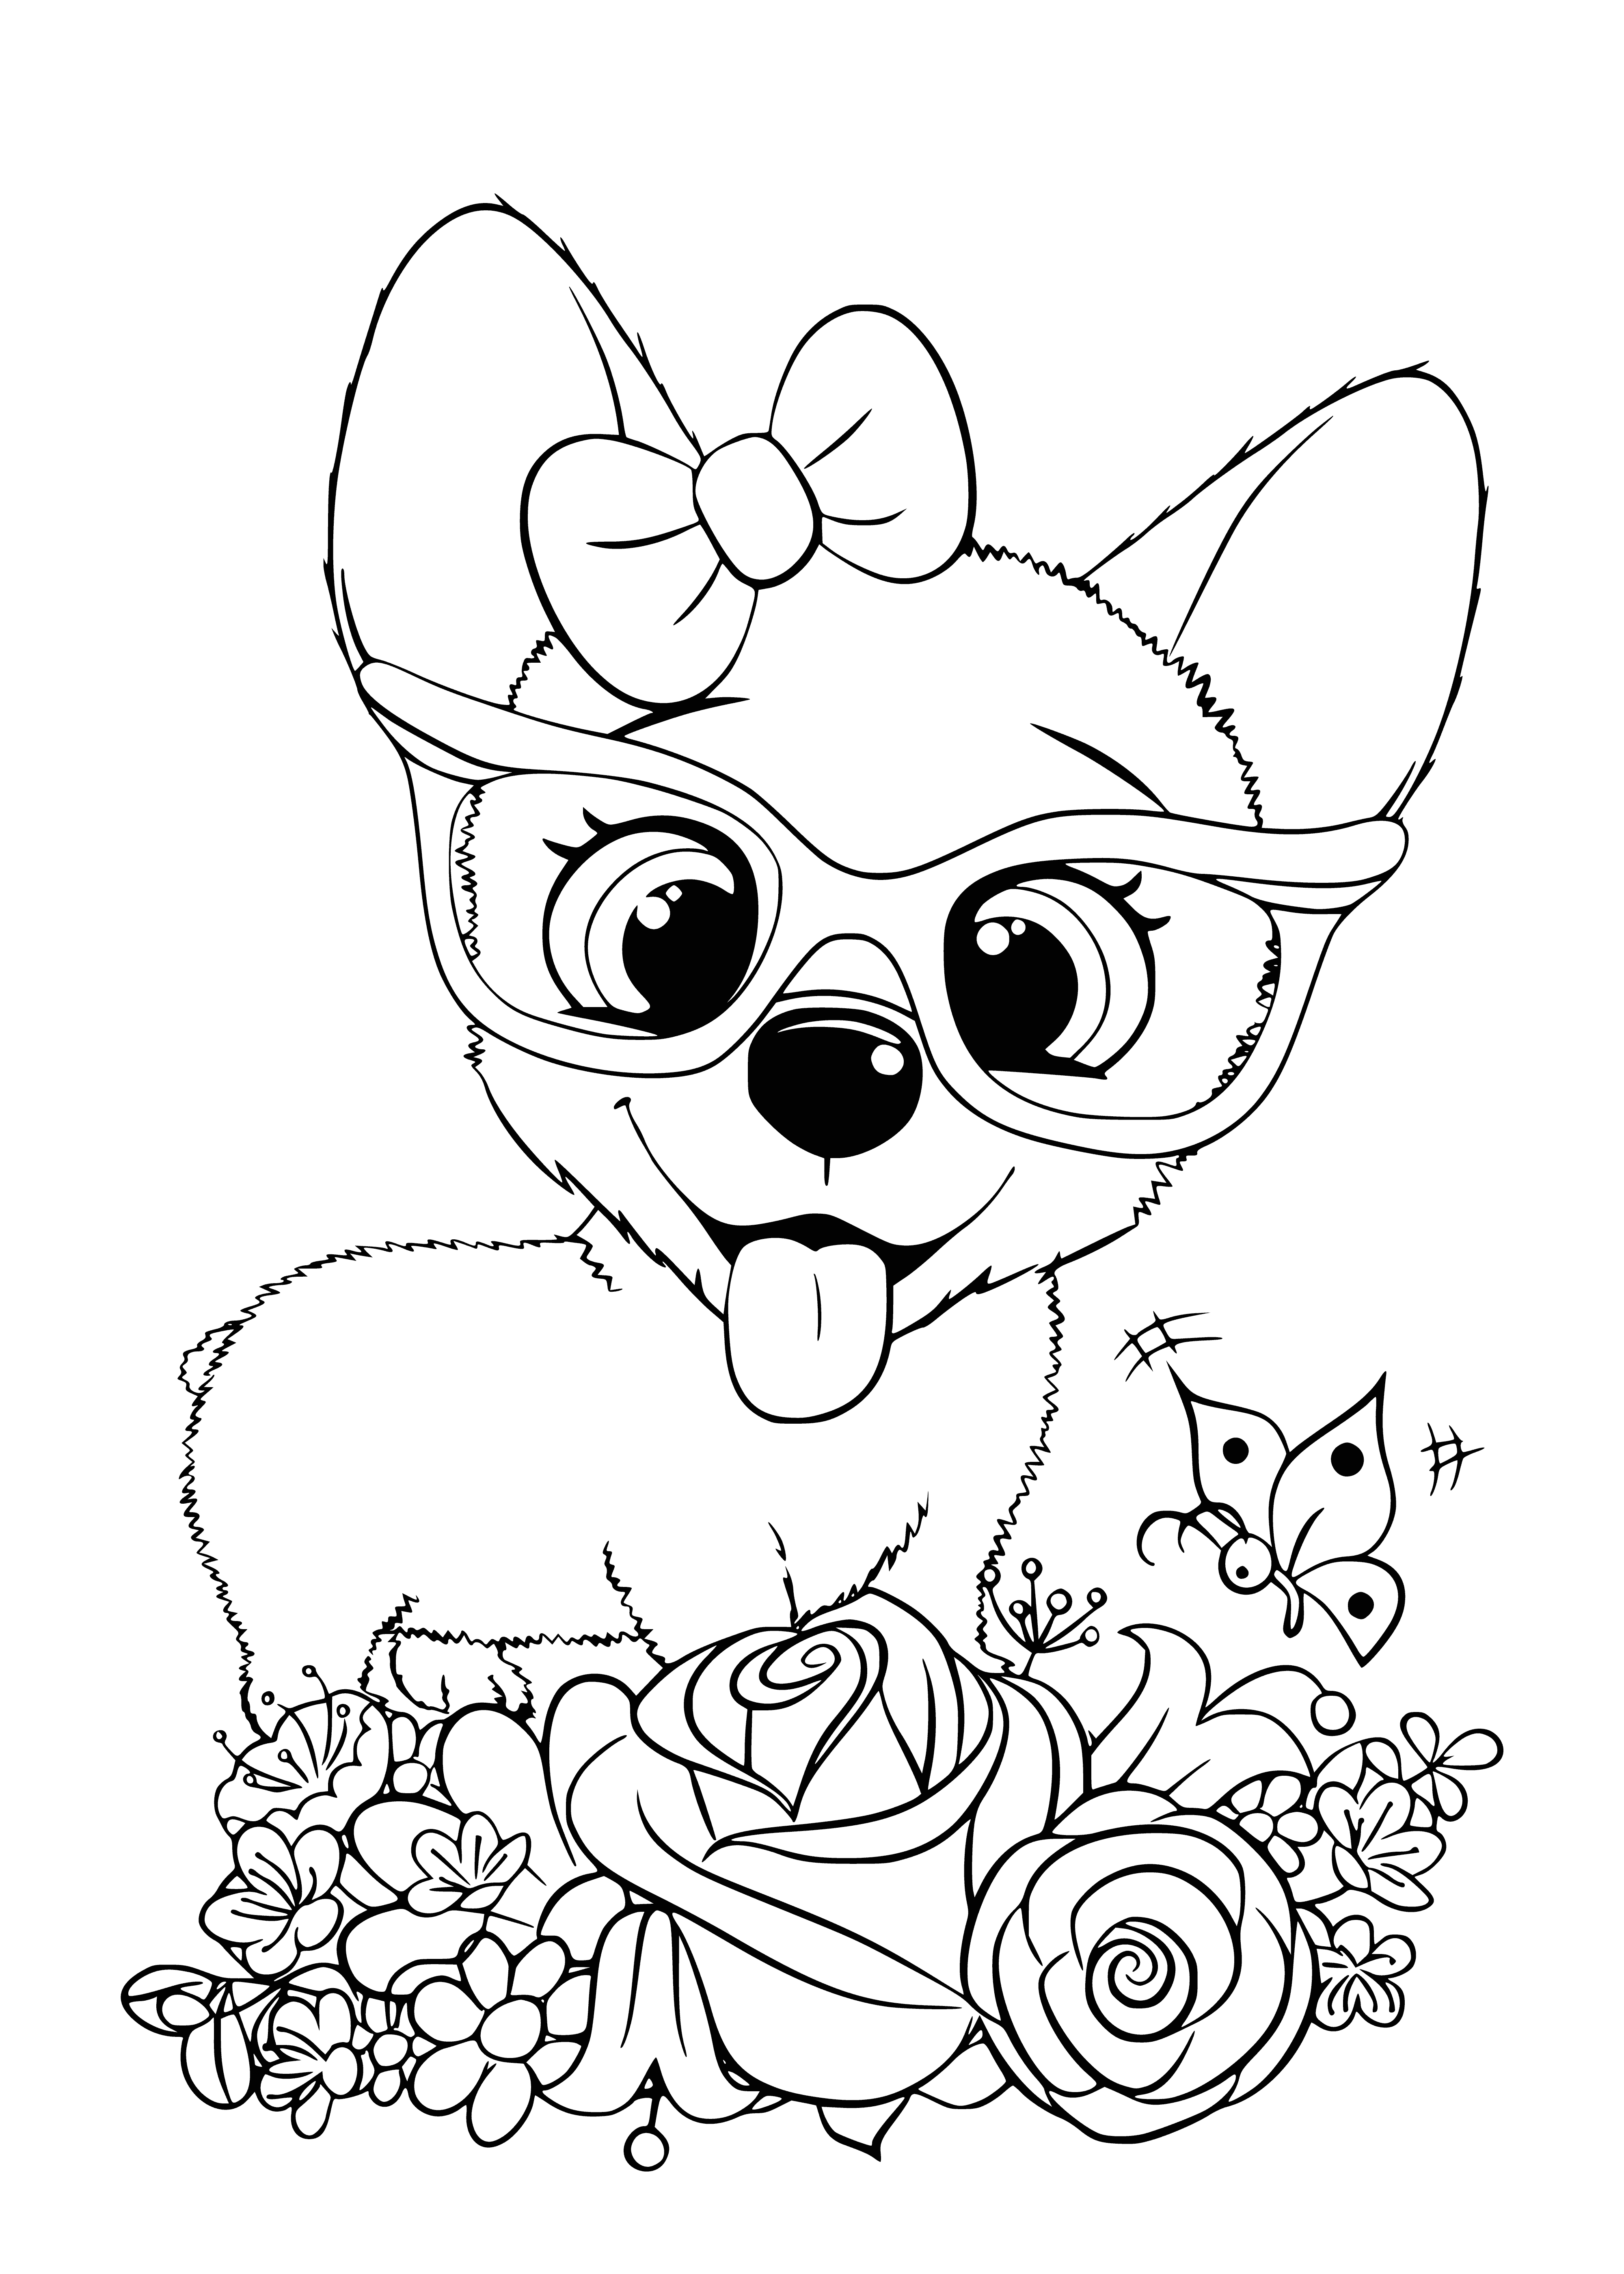 coloring page: A cute brown and white puppy with a blue collar and bell smiles from the Kawaii cute coloring page. #puppylove